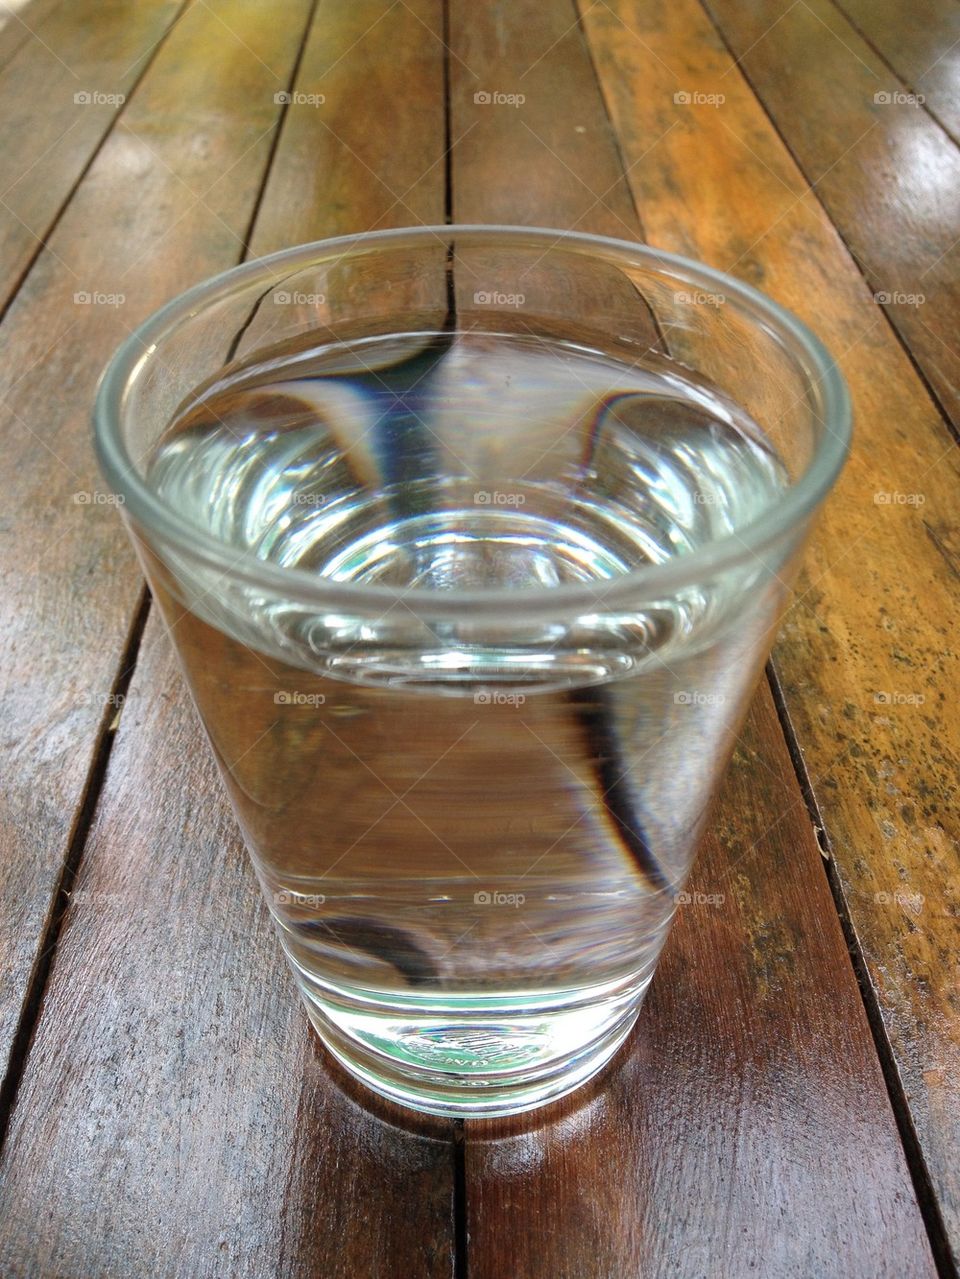 A glass of water on wood table